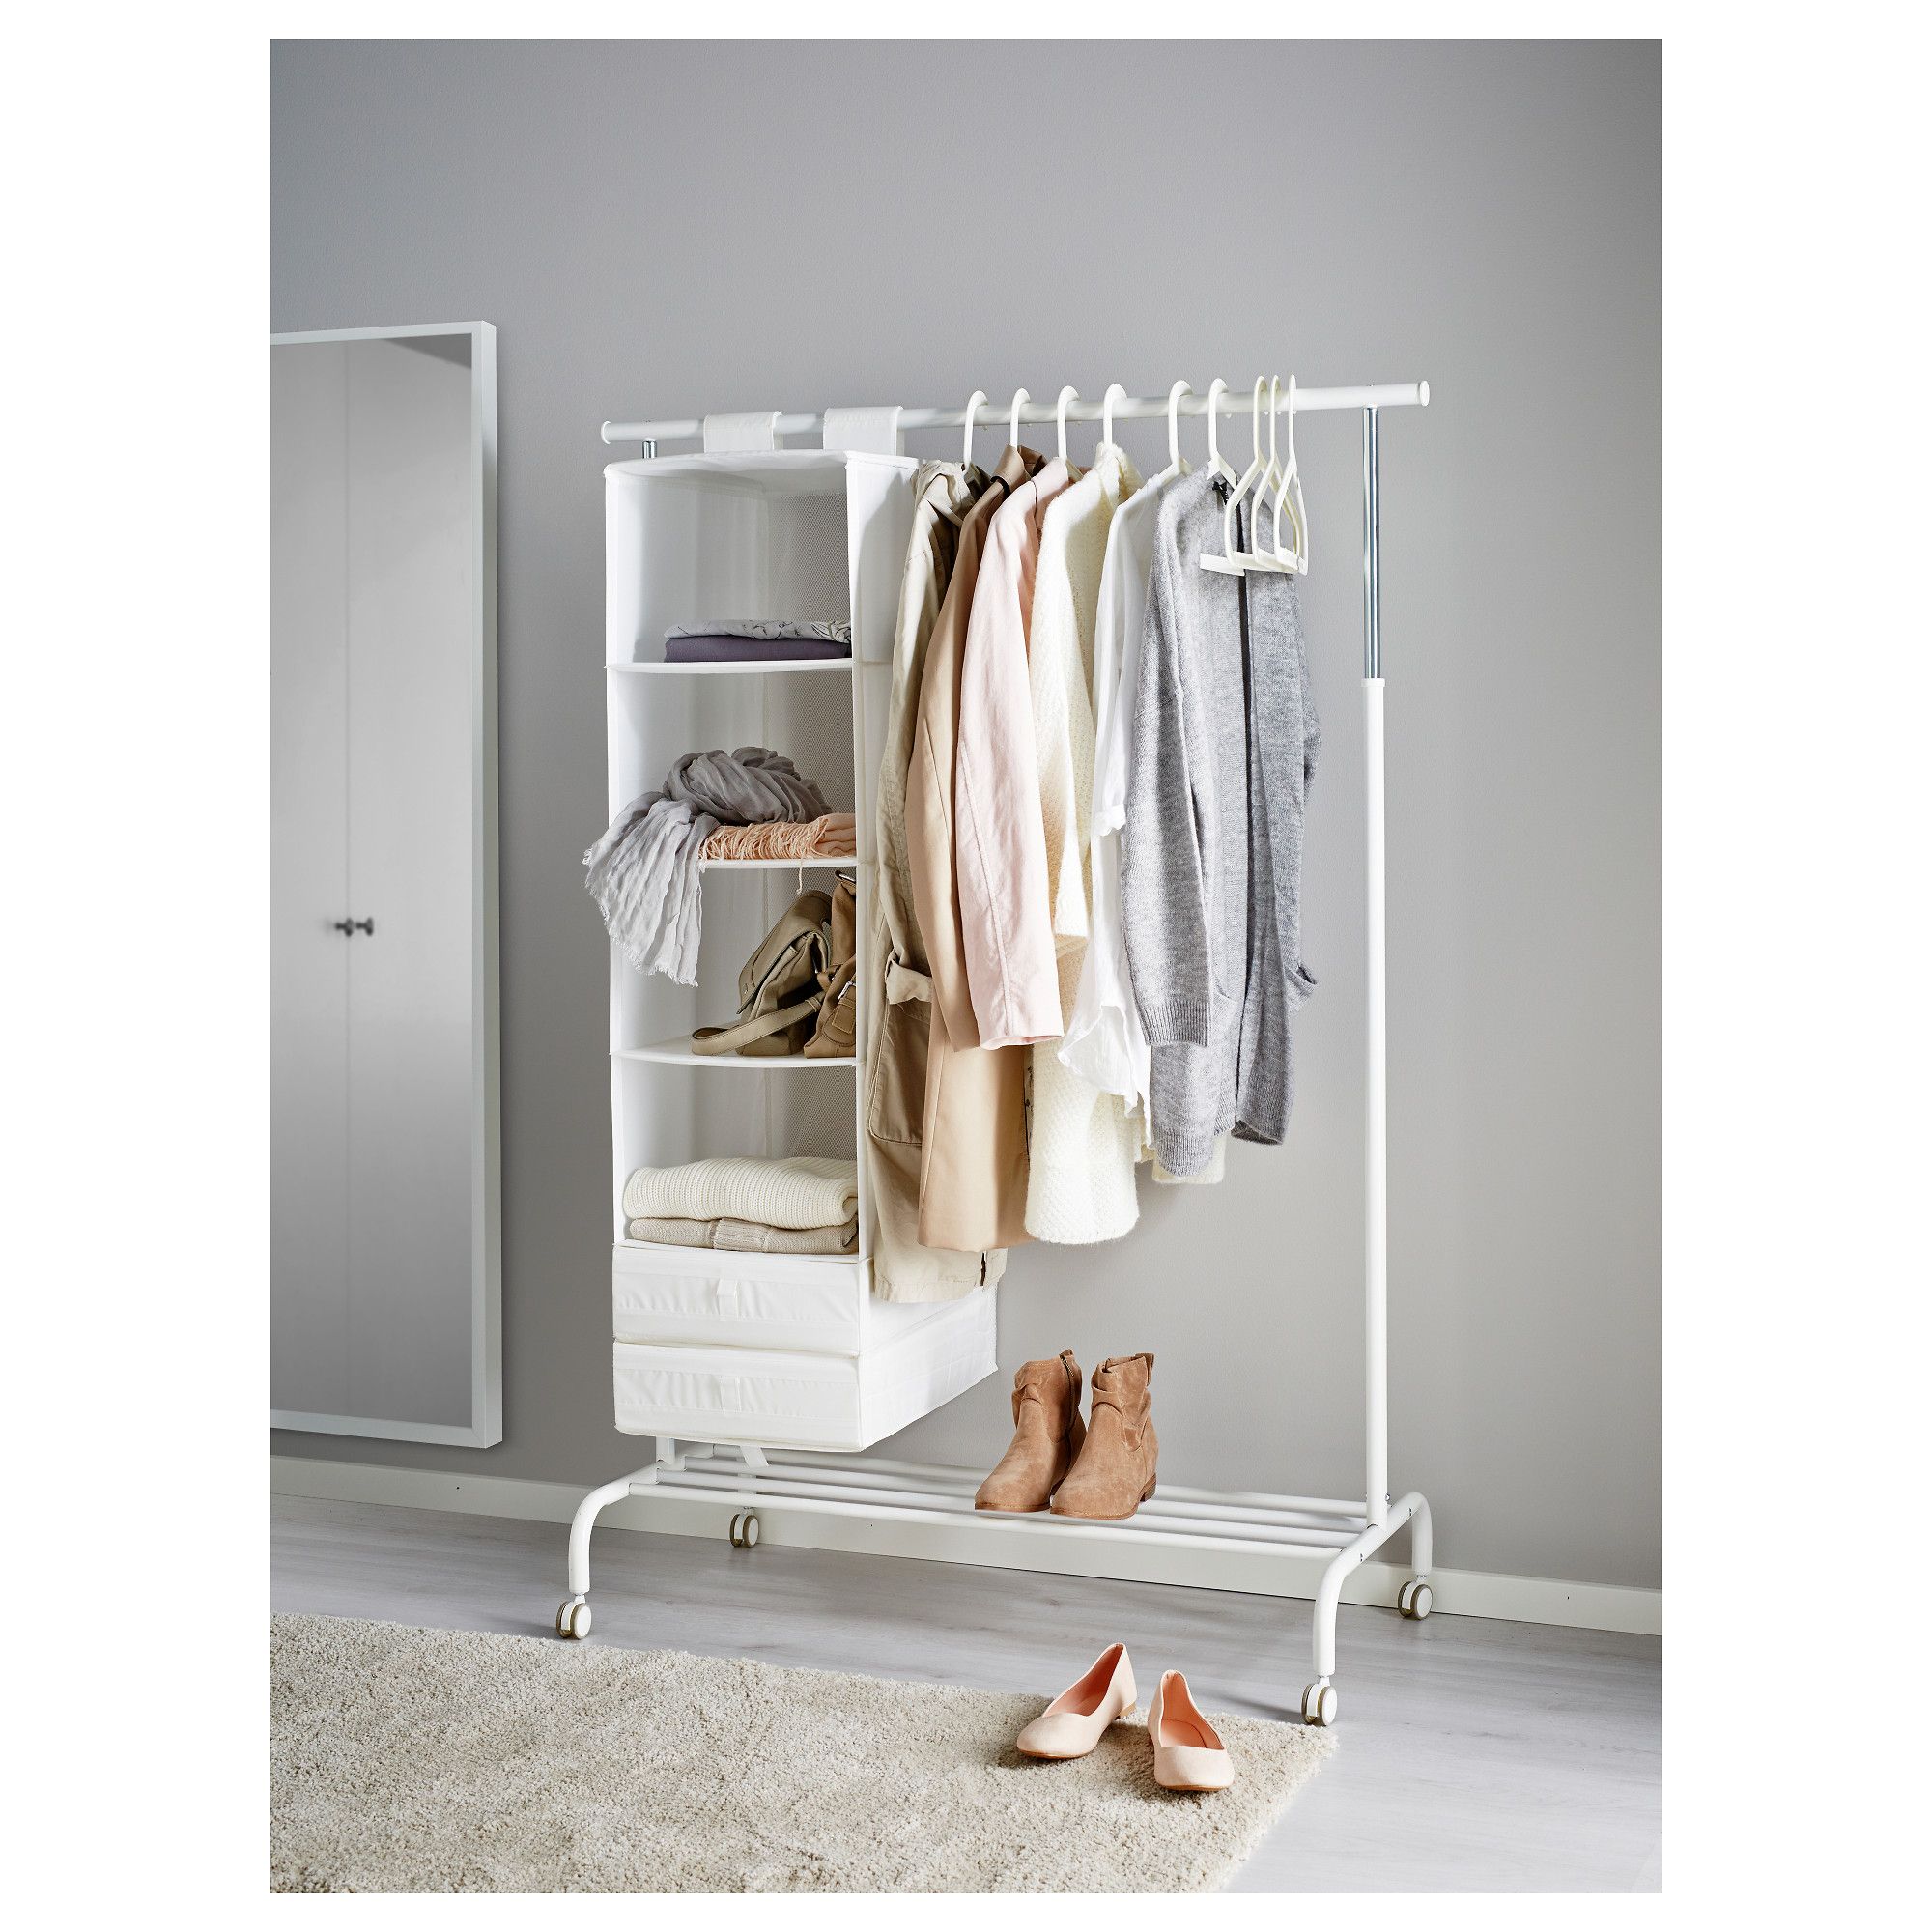 Rigga Clothes Rack White | Ikea Lietuva Intended For Ikea Double Rail Wardrobes (View 6 of 20)